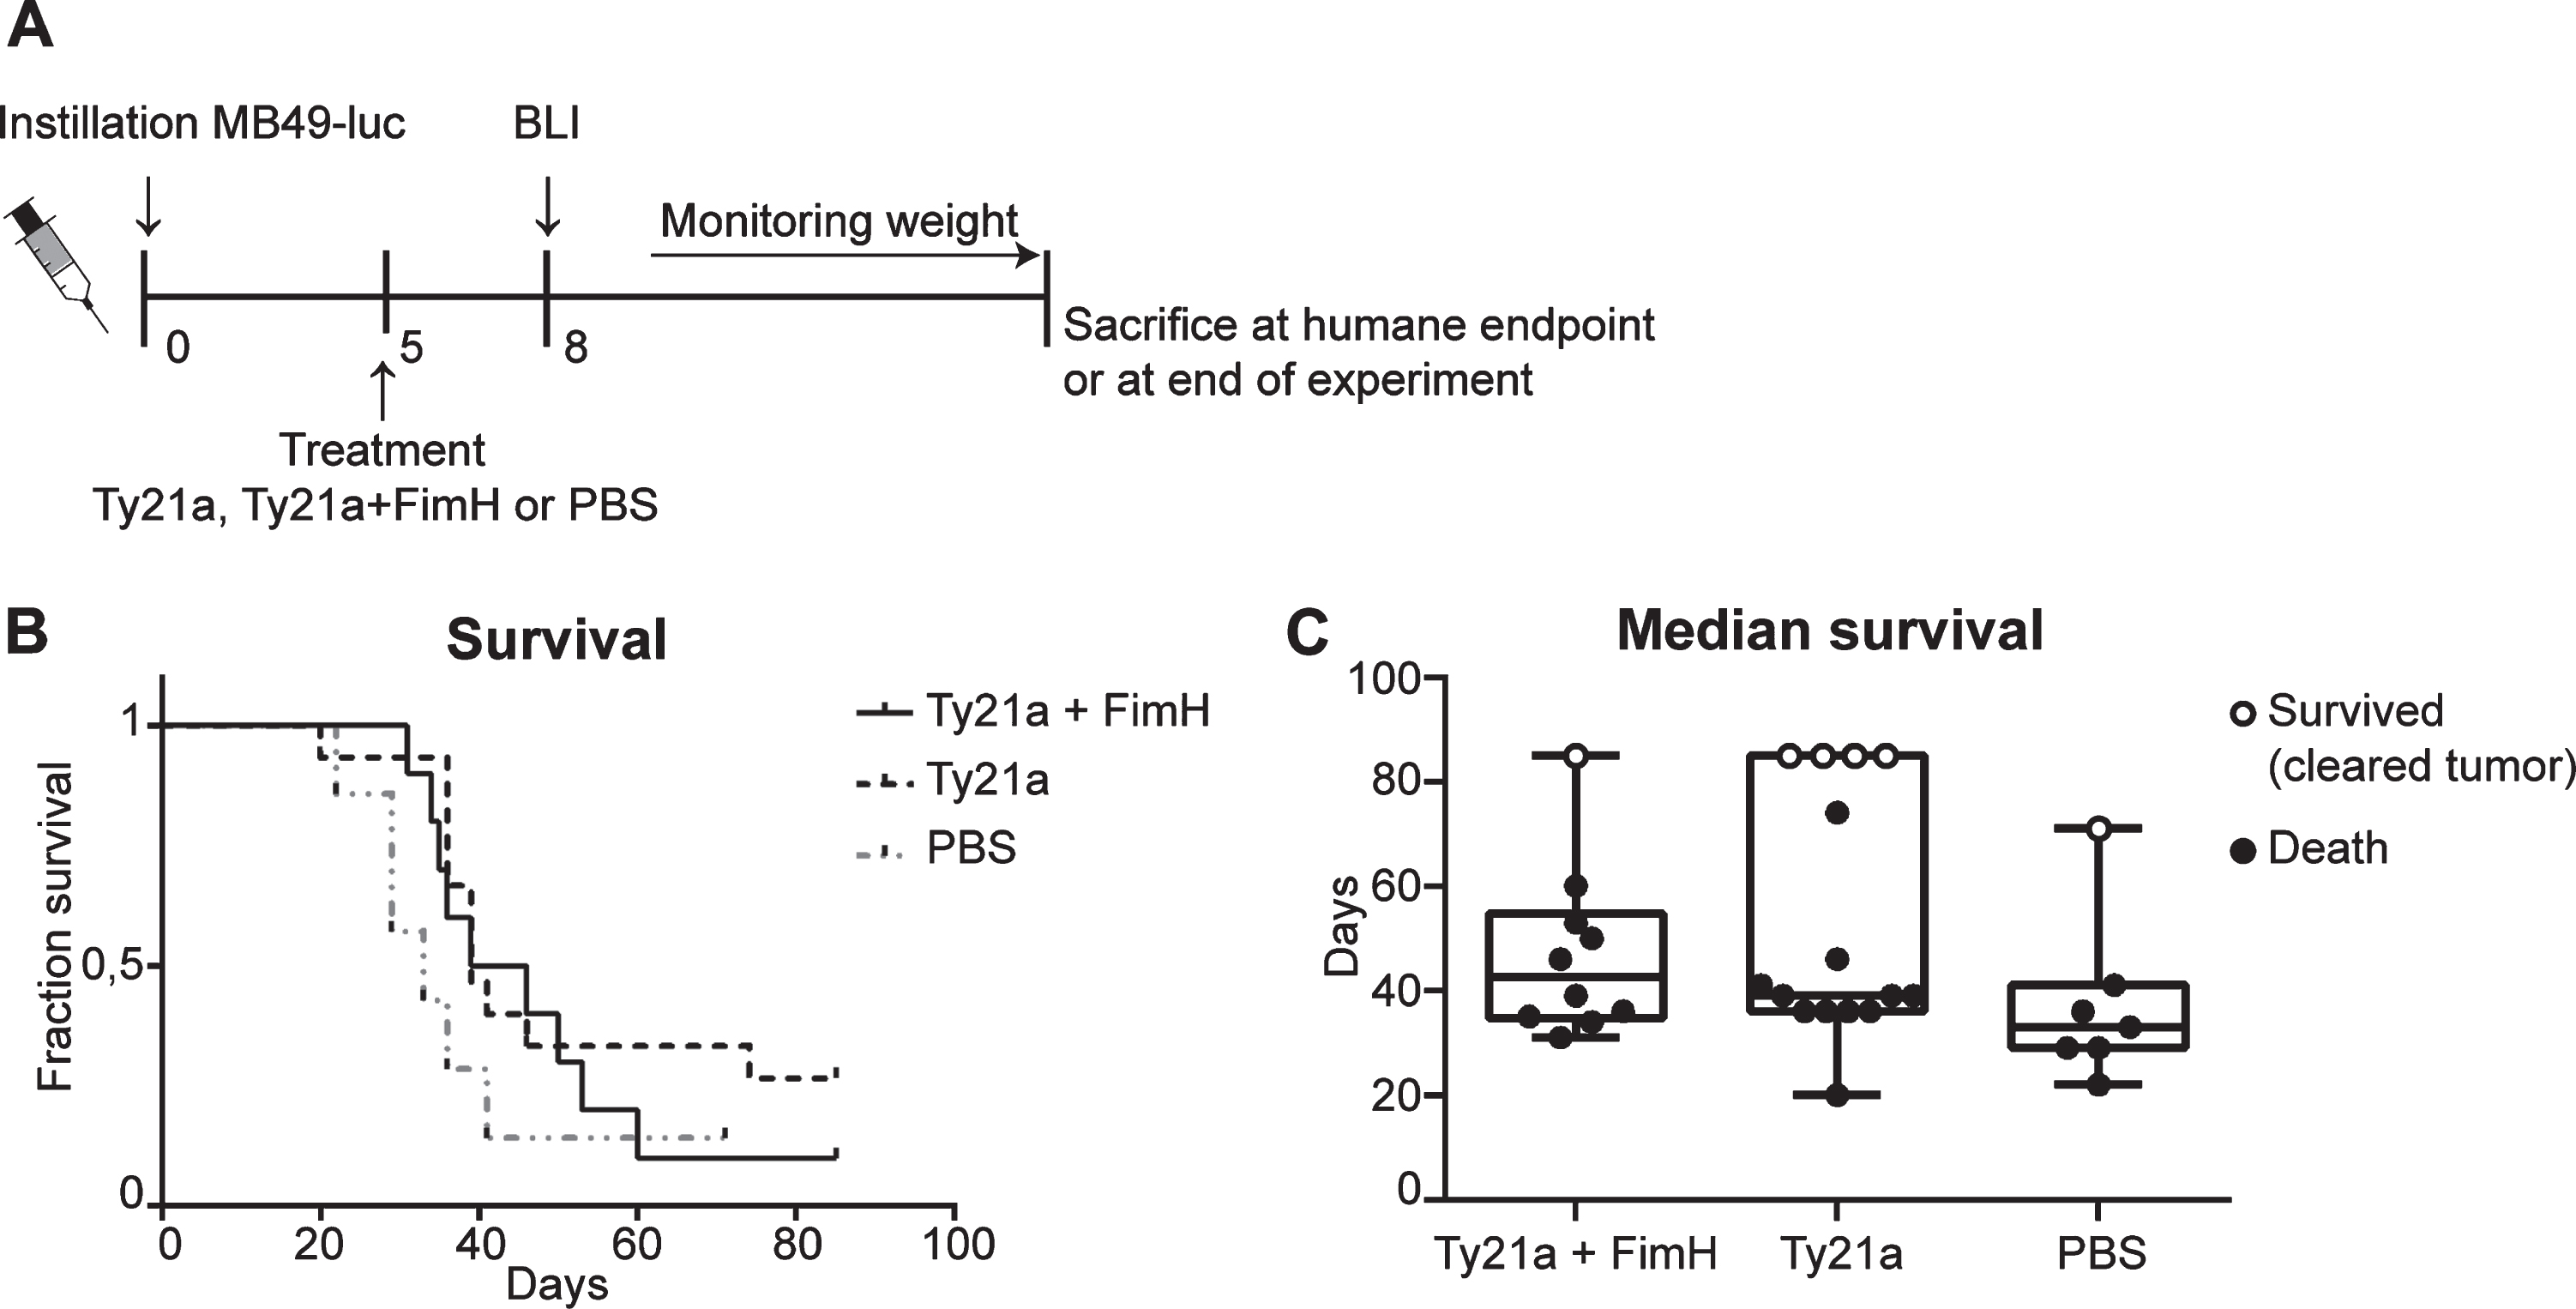 Survival experiment bladder cancer mouse model with Ty21a and FimH treatment. (A) Schematic overview of experimental set-up. Mice received 3*103 MB49-luc cells at day 0 and were treated at day 5. Mice that developed tumors at day 8 according to BLI Ty21a+FimH (n = 10), Ty21a (n = 15) and PBS (n = 7) were included for survival analysis. (B) Kaplan-Meier curve showing survival of mice treated with Ty21a+FimH, Ty21A and PBS. (C) Median survival of different treatment groups. Mice which died and showed a bladder tumor upon macroscopic analysis are presented as filled circles. Mice which showed no sign of a bladder tumor upon macroscopic analysis are considered ‘cured’. These are presented as open circles.